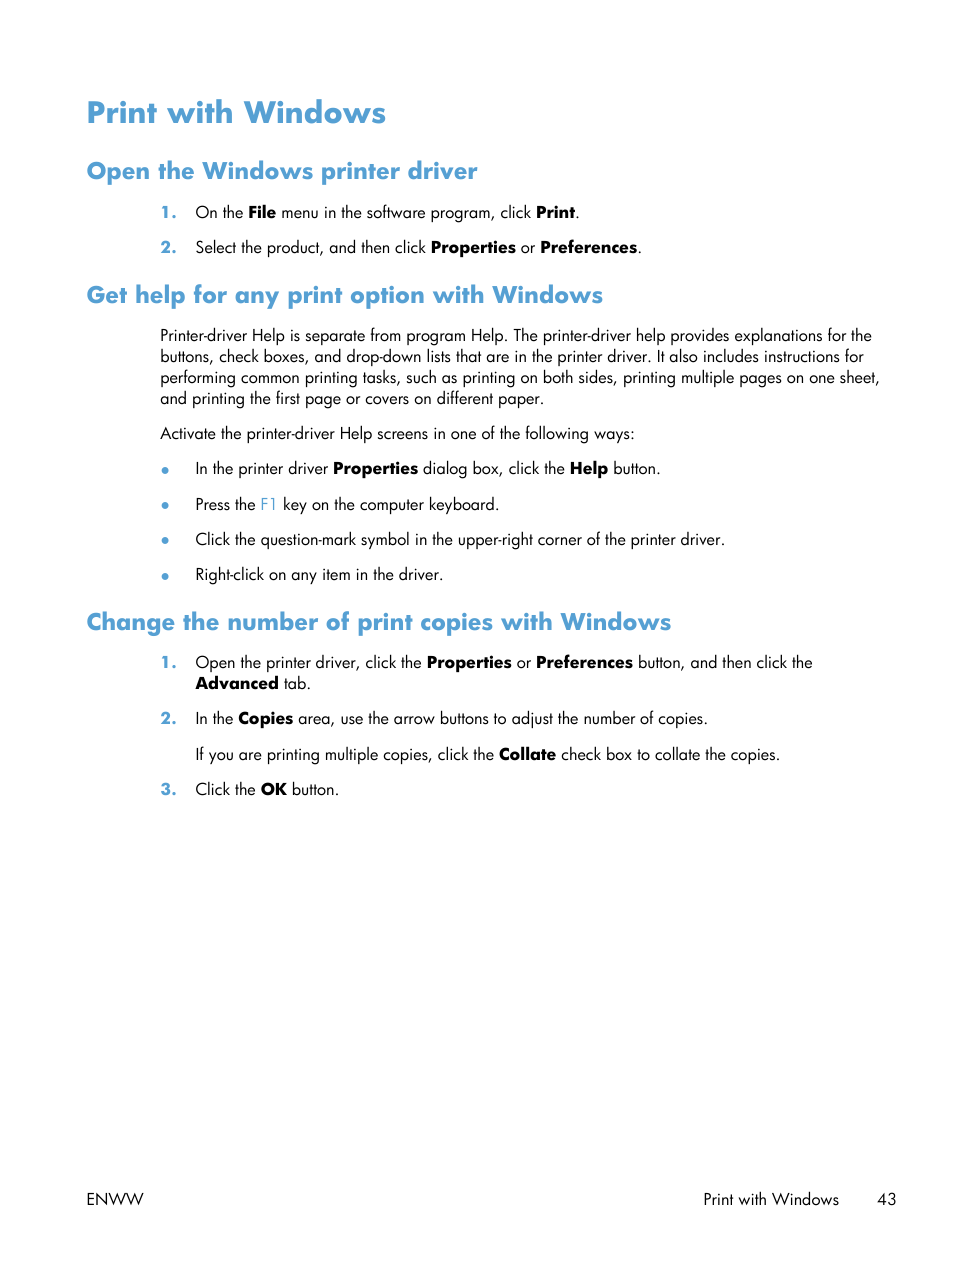 Print with windows, Open the windows printer driver, Get help for any print option with windows | Change the number of print copies with windows | HP Laserjet p1606dn User Manual | Page 55 / 152